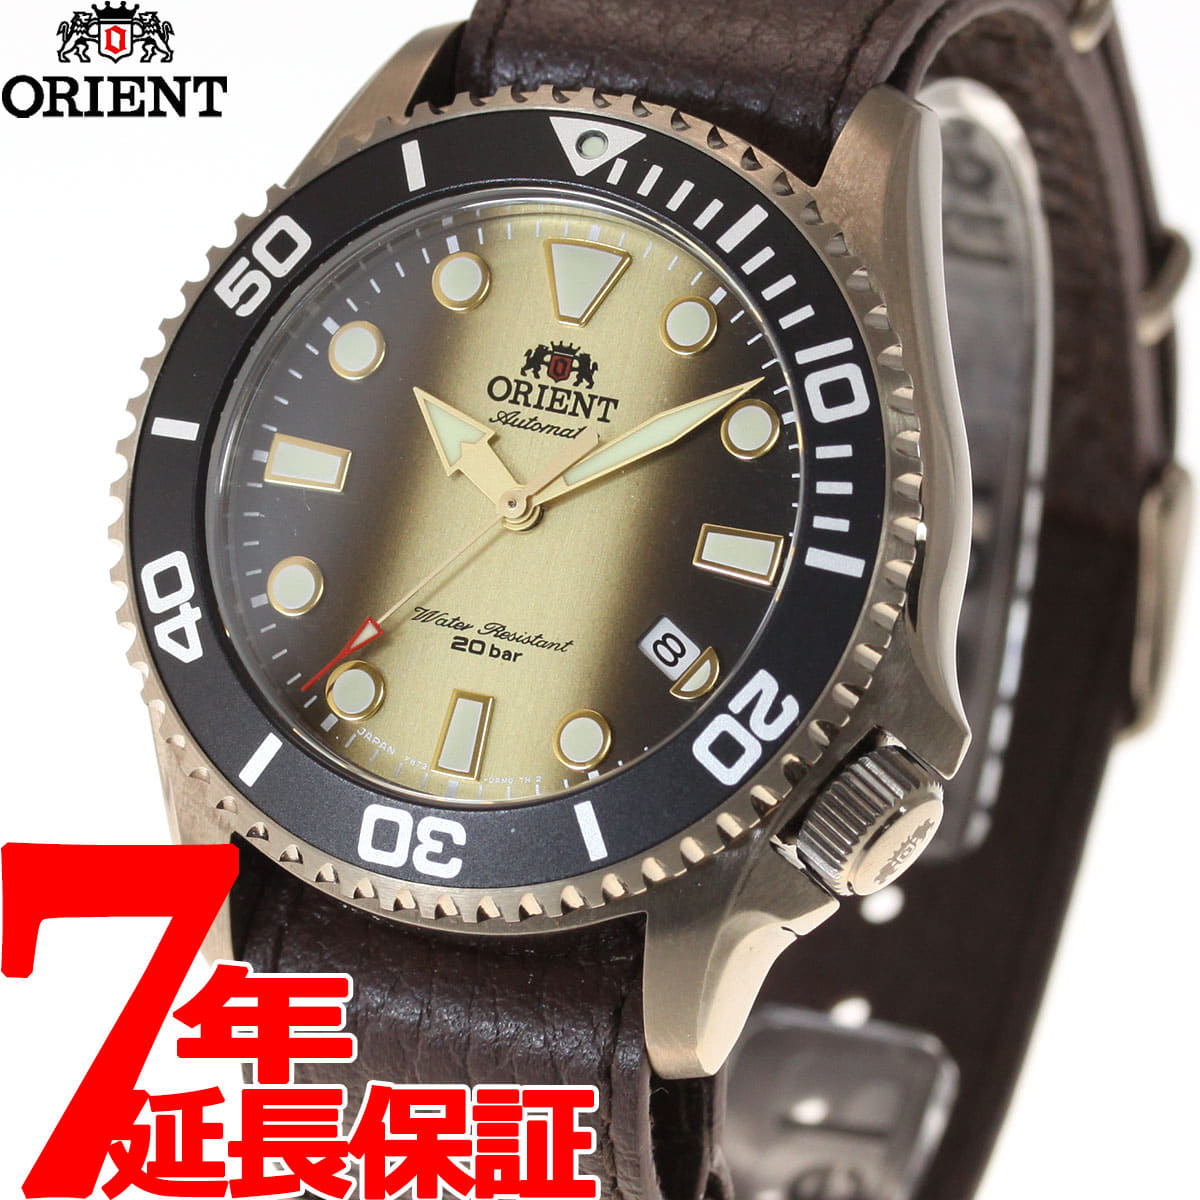 New]in the shop model jaguar Focus diver ORIENT Sports Jaguar Forcus  RN-AC0K05G 2020 new work of the 70th anniversary of the orient mens  Automatic winding machine type - BE FORWARD Store